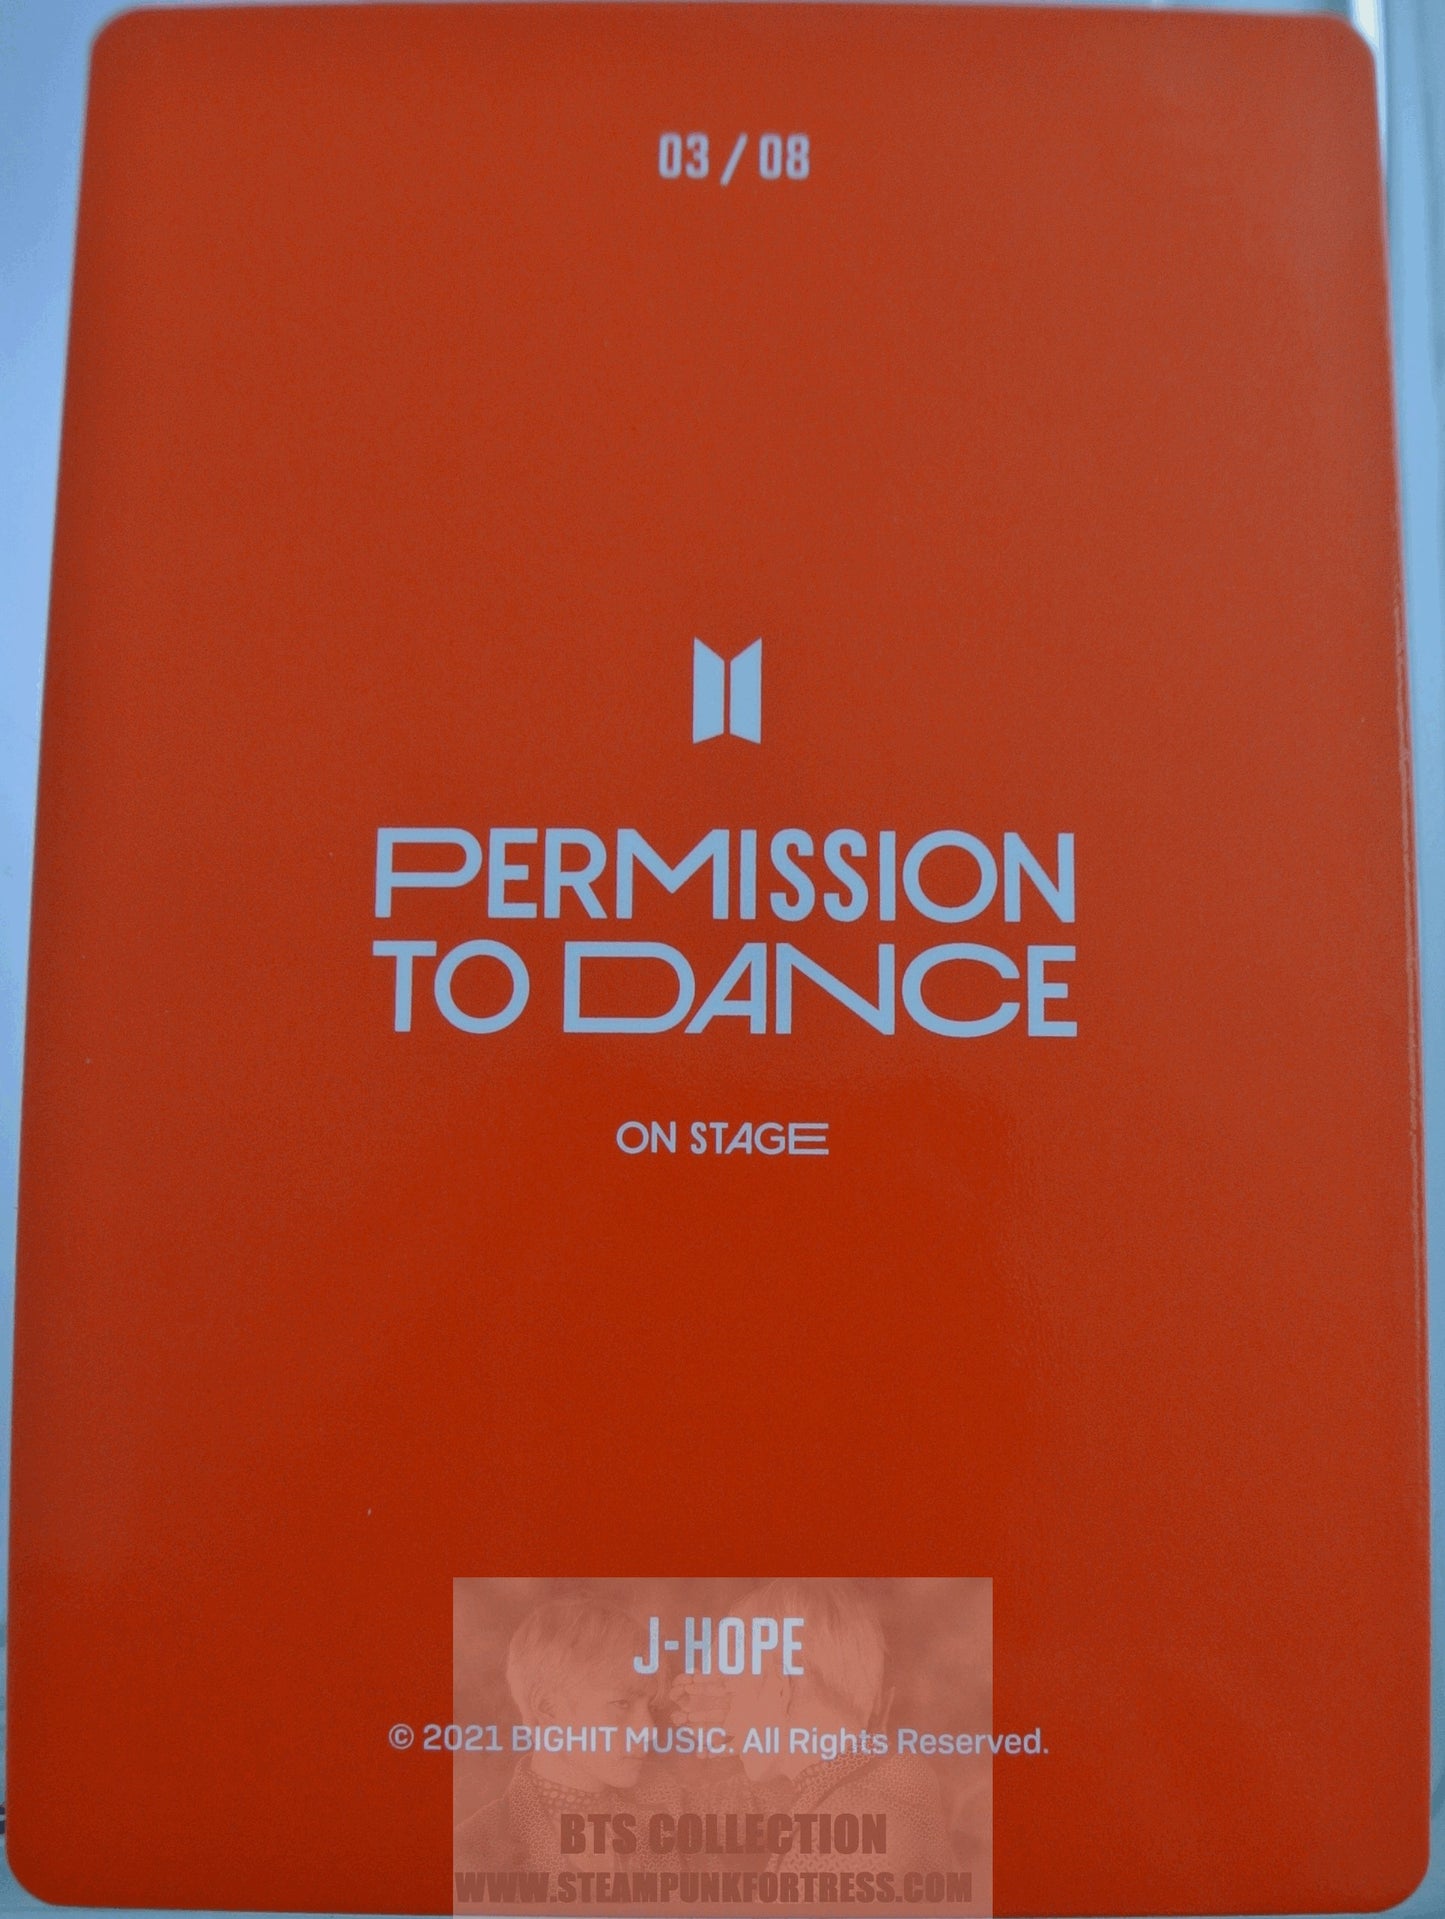 BTS J-HOPE JUNG HOSEOK HO-SEOK JHOPE 2021 PERMISSION TO DANCE ON STAGE #3 OF 8 PHOTOCARD PHOTO CARD PTD PC NEW OFFICIAL MERCHANDISE